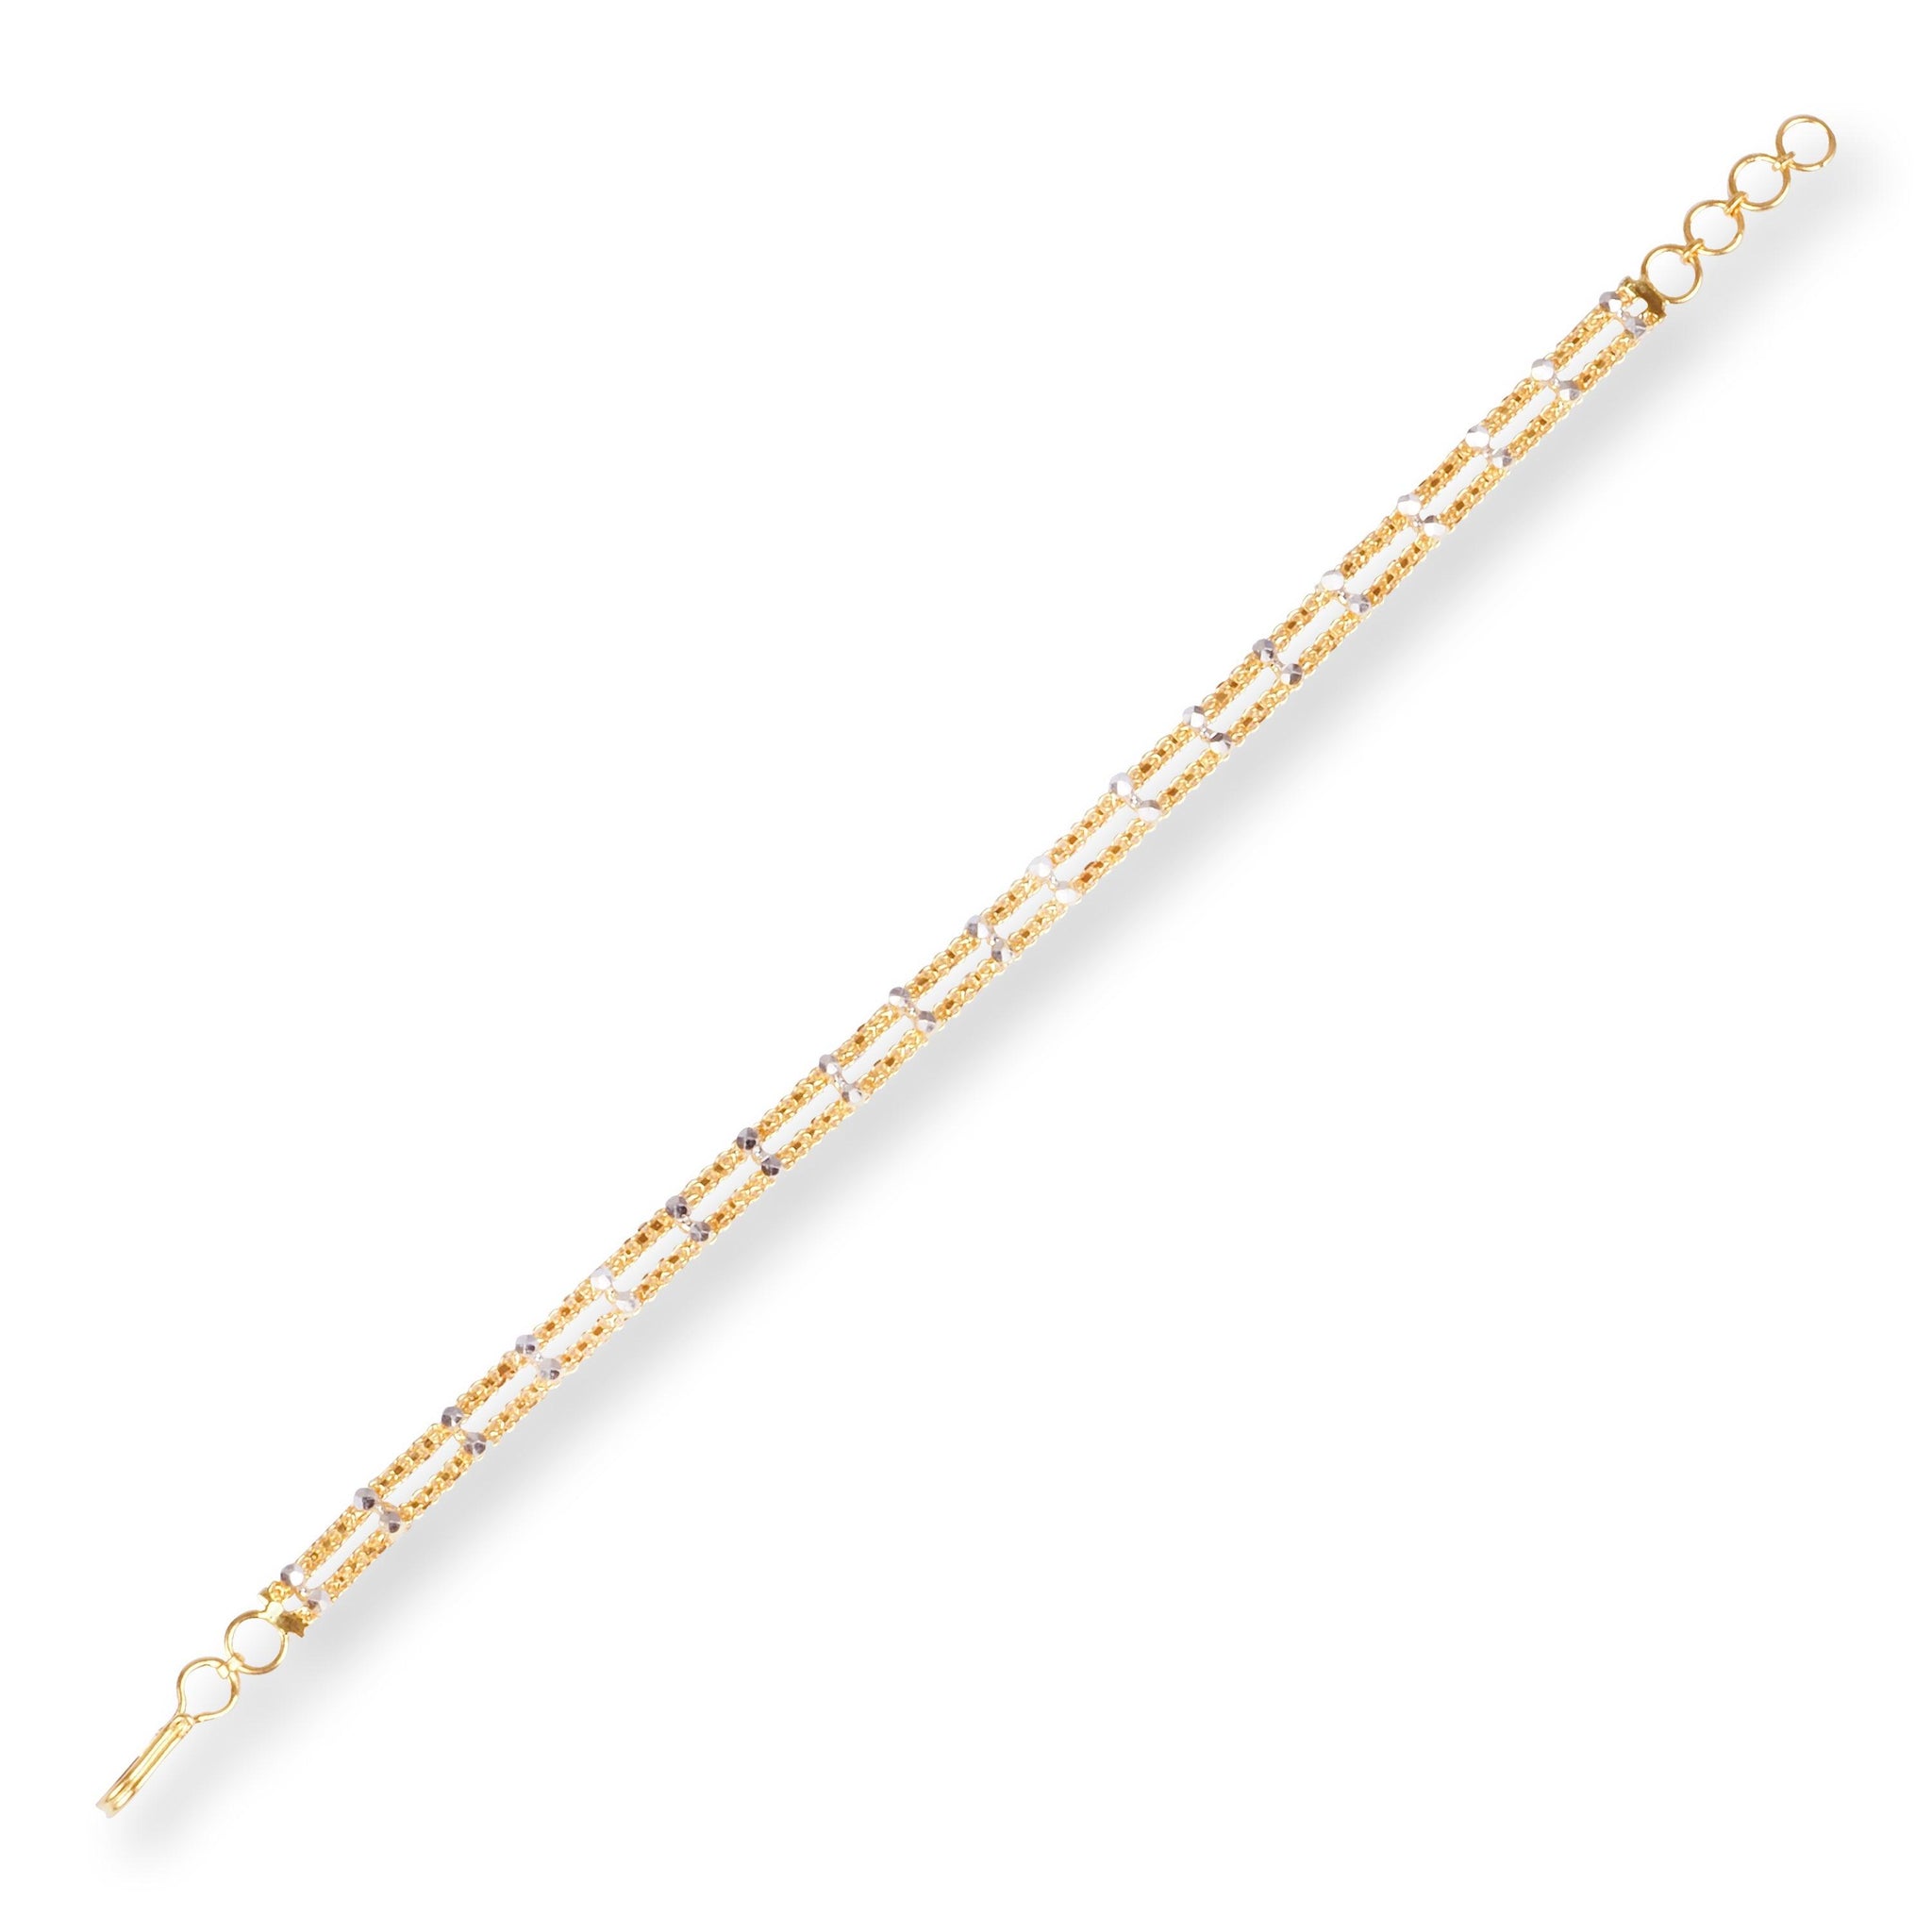 22ct Gold Two Row Bracelet with Diamond Cut Beads and Hook Clasp LBR-8496